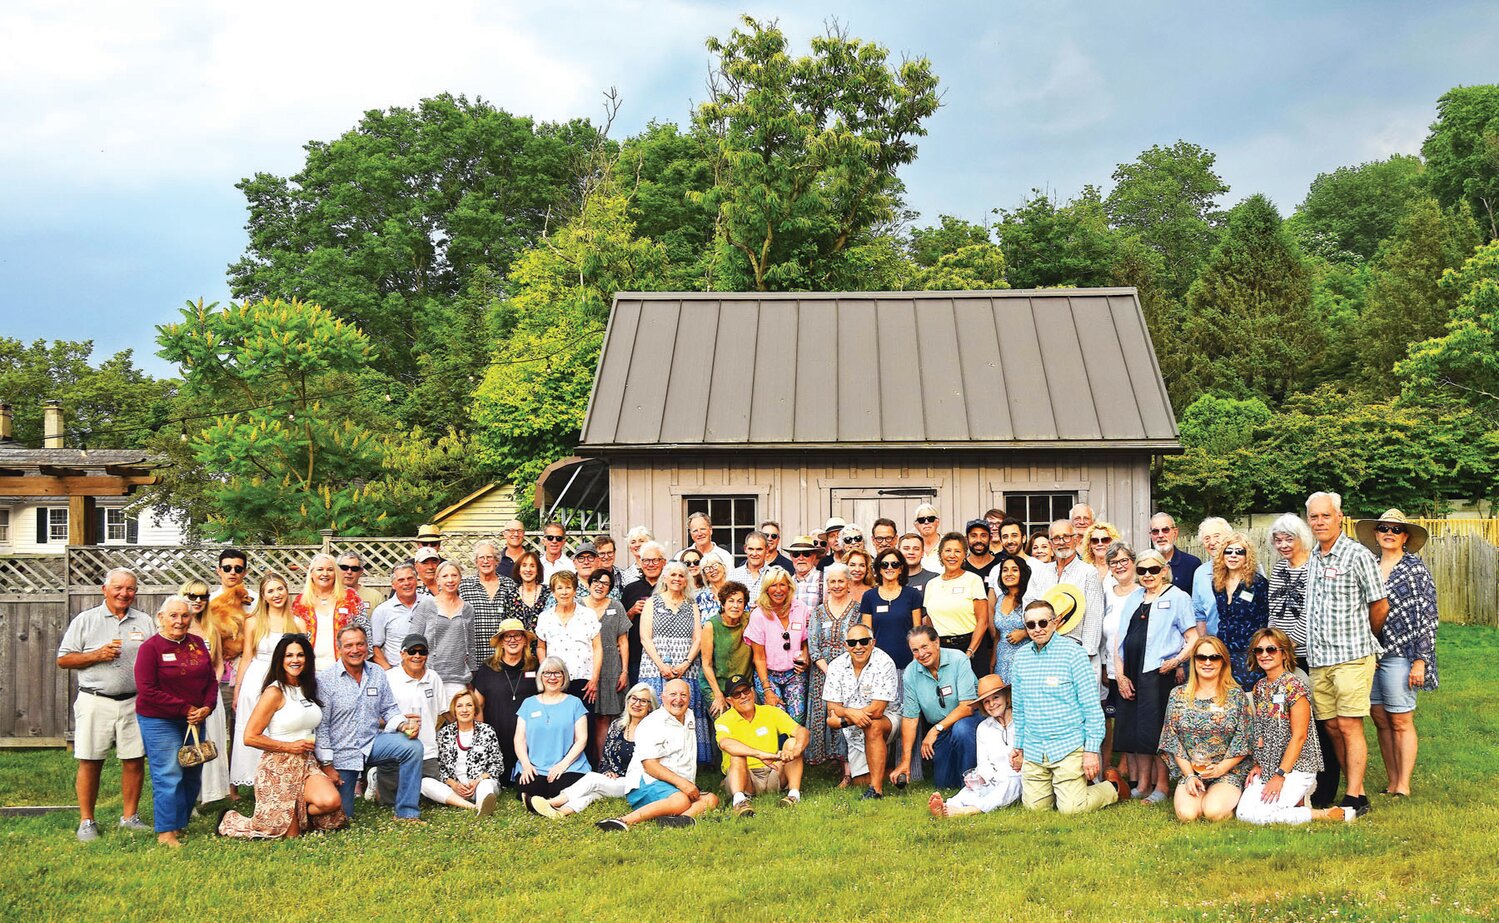 Residents of Lumberville gather for the annual Founder’s Day Picnic on June 11.